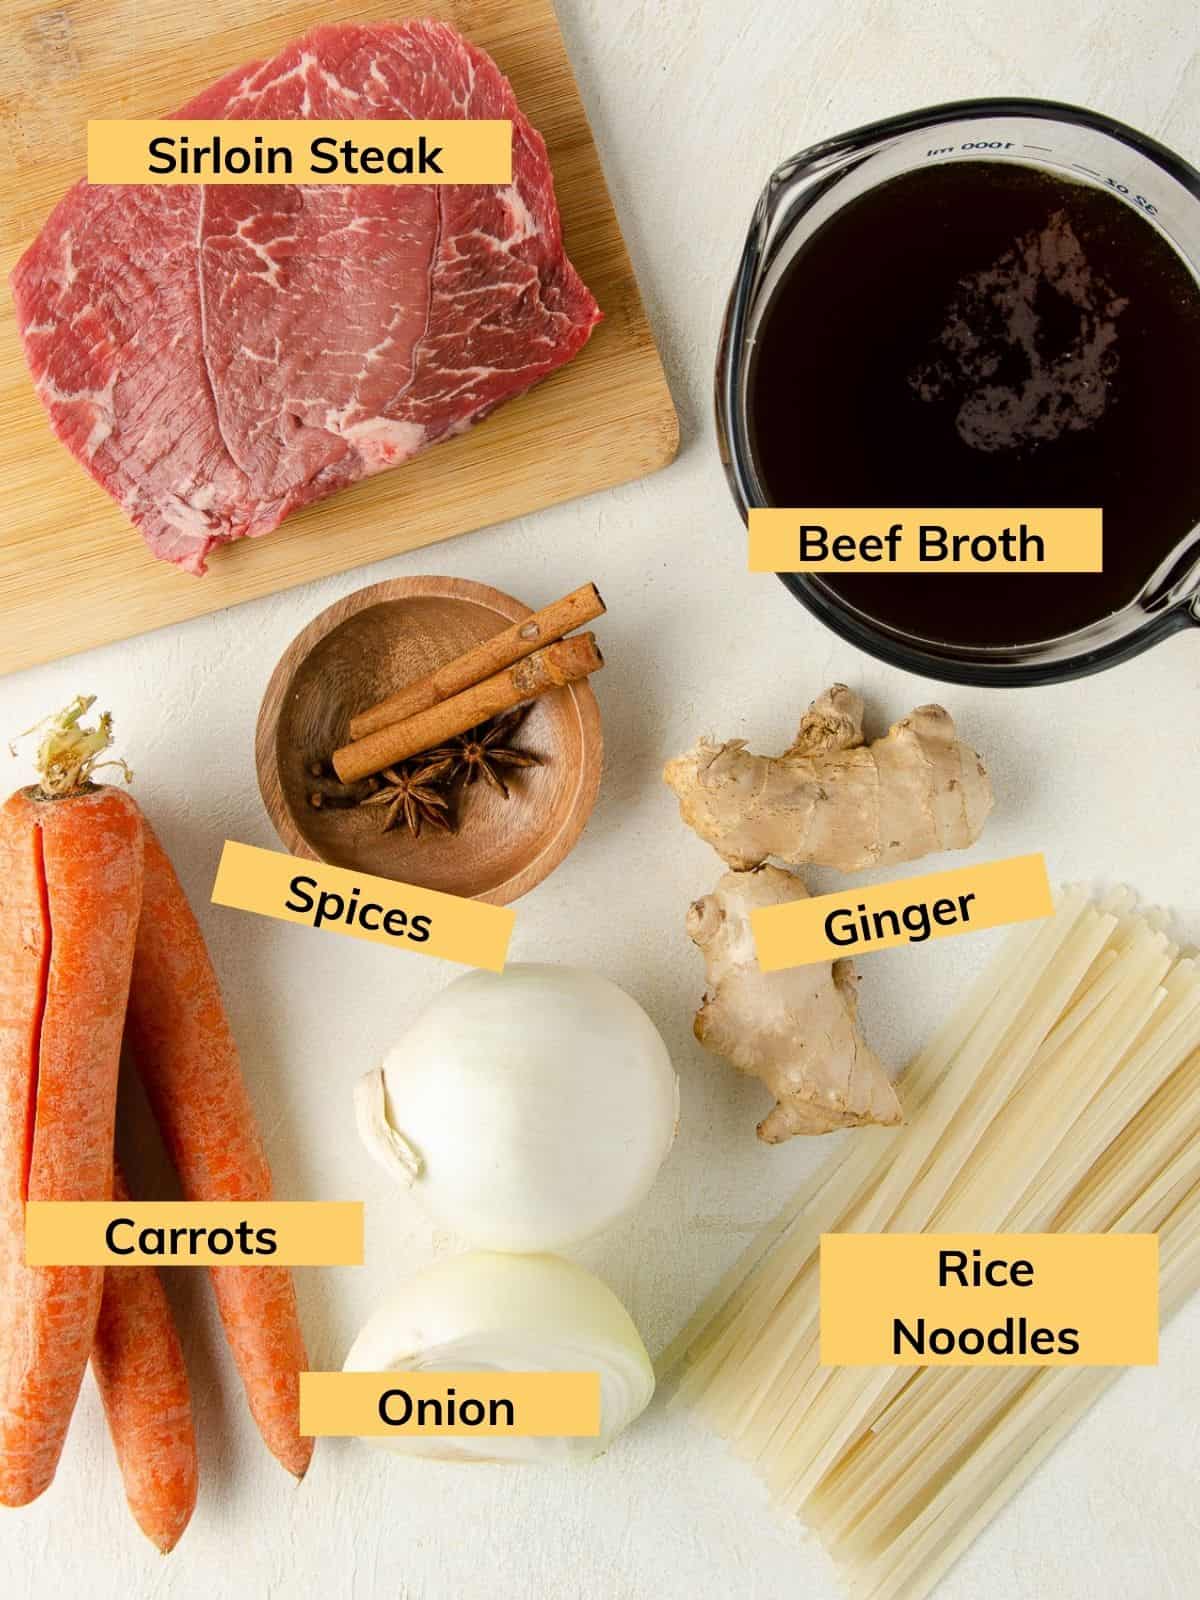 Ingredients to make your own gluten free pho: beef broth, spices, ginger root, rice noodles, onion, carrots and sirloin steak.